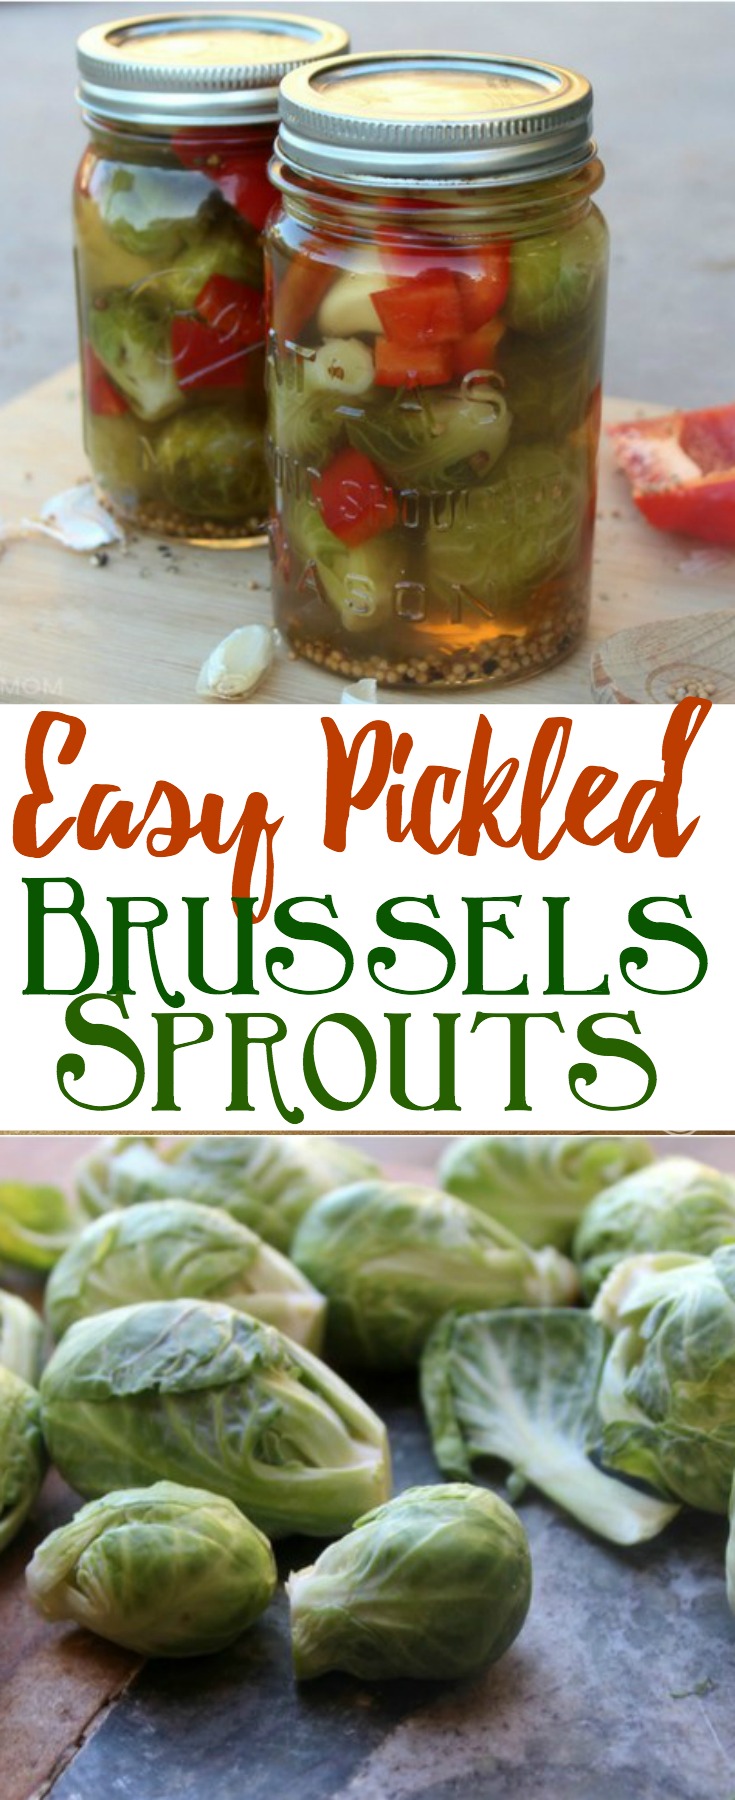 An easy pickling recipe for pickled Brussels Sprouts that transforms Brussels Sprouts into crunchy and tangy sprouts covered in a flavorful brine rich in garlic and spices.